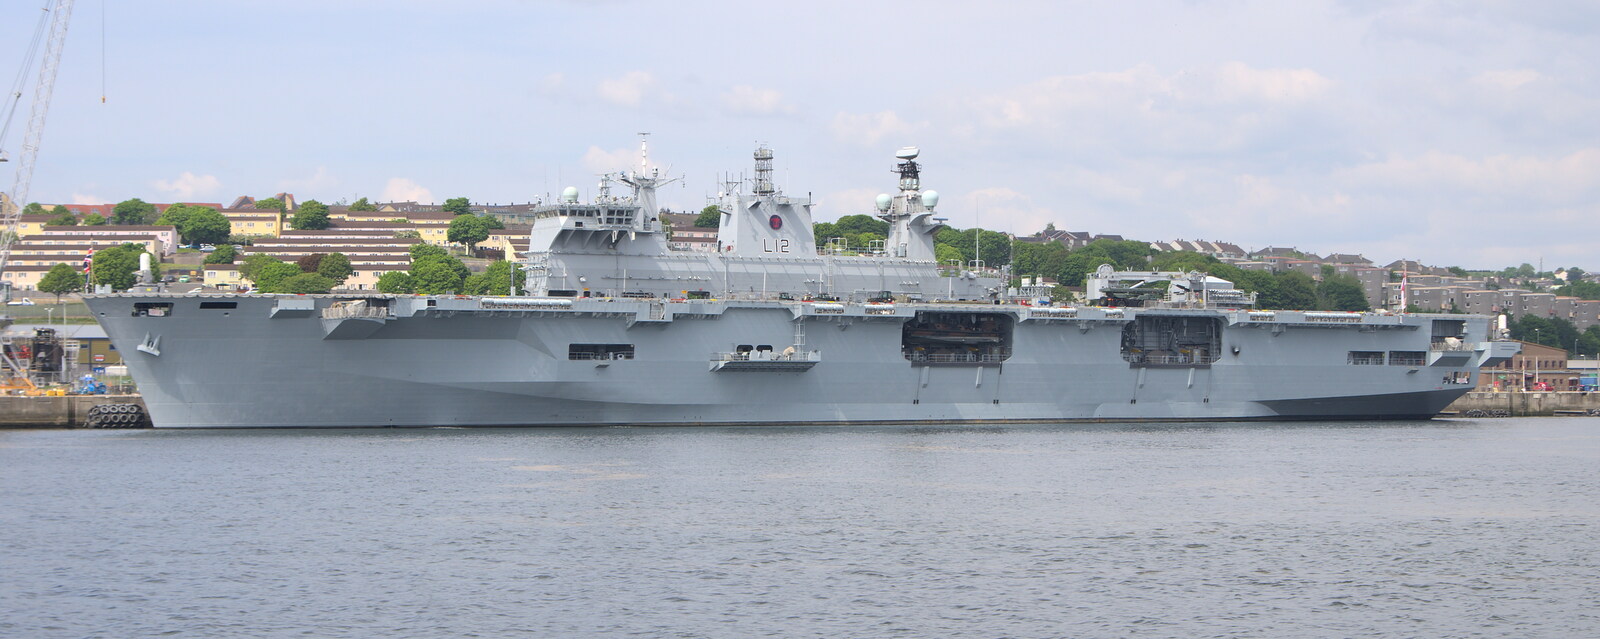 L12 HMS Ocean - the Royal Navy's biggest ship from A Tamar River Trip, Plymouth, Devon - 30th May 2016